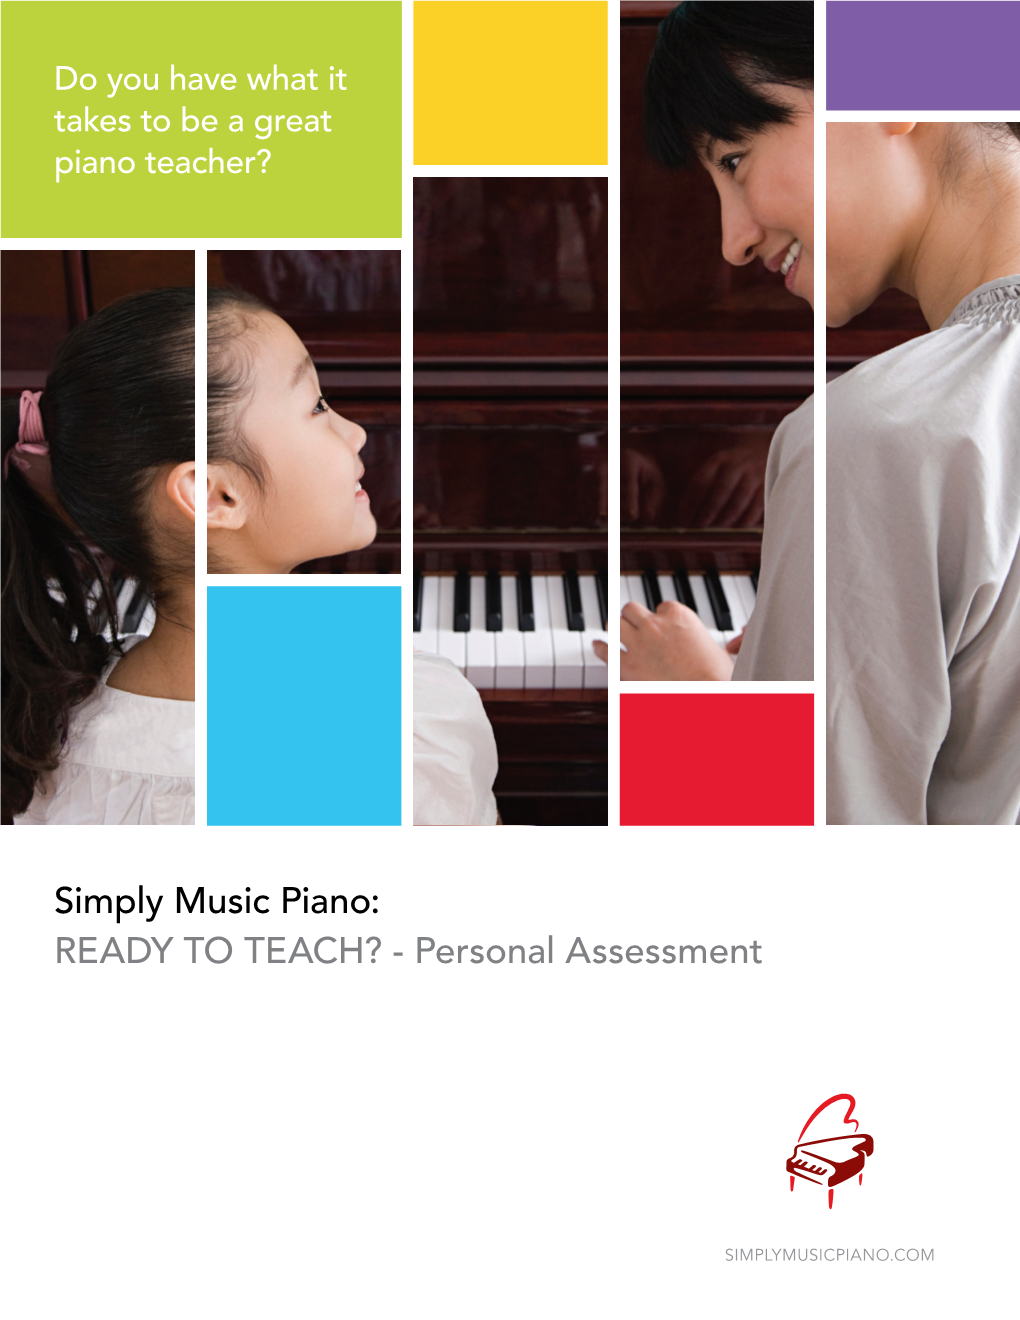 Simply Music Piano: Ready to Teach? - Personal Assessment